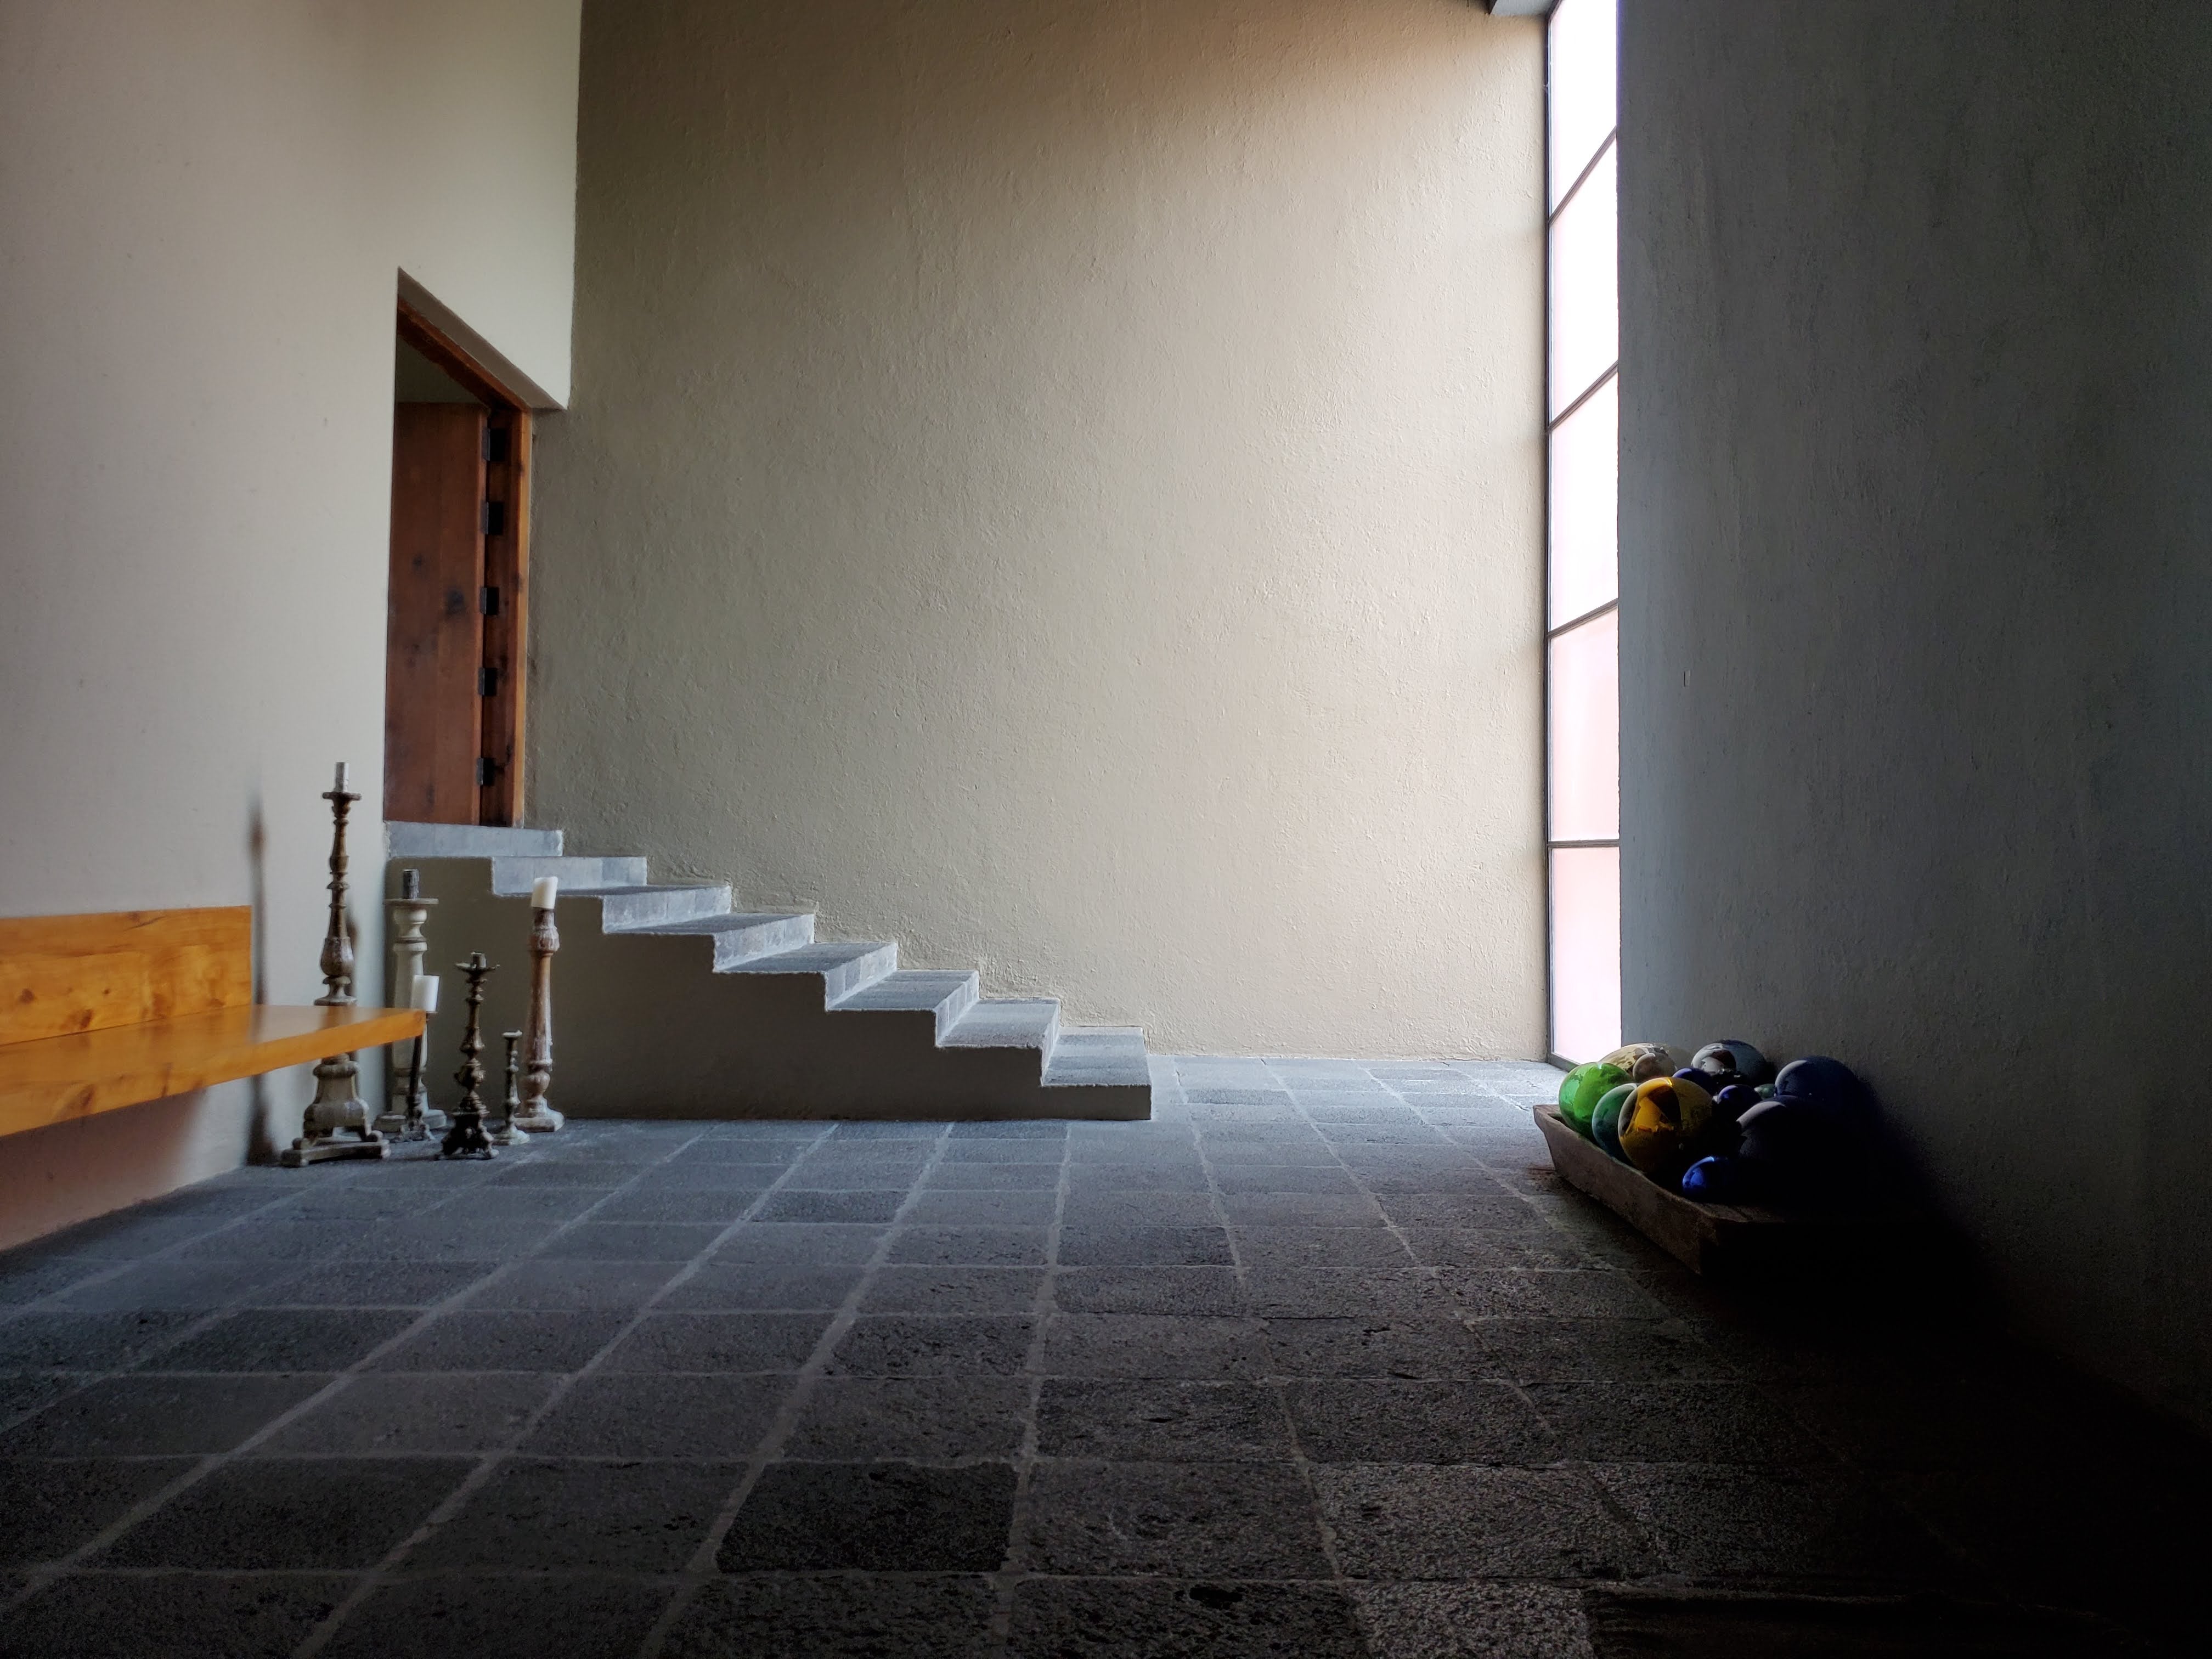 Casa Pedregal entry way stairs designed by Luis Barragán in Mexico City.